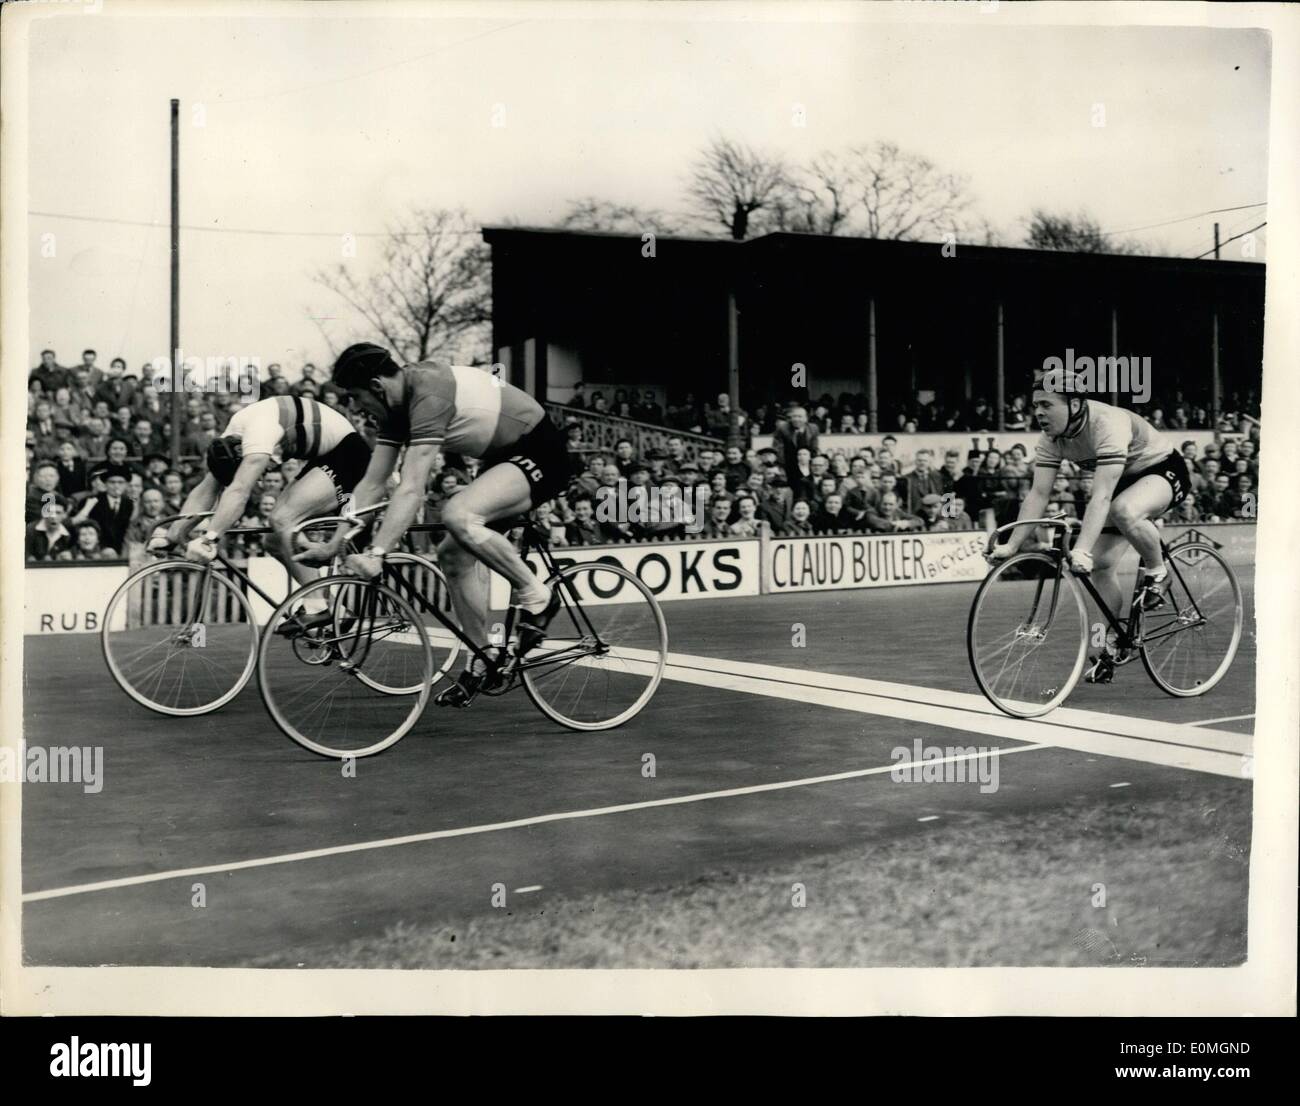 Apr. 04, 1955 - 9.4.55 Cycling at Herne Hill. The Southern Counties Cycling Union International Cycle Racing Festival, was held yesterday, Good Friday at Herne Hill. Keystone Photo Shows: The finish of the Professional Contest Match B , showing Cyril Peacock (Gt. Britain), winning, with Jacques Bellenger, of France, second, and Roger Gaignard, of France, third. Stock Photo